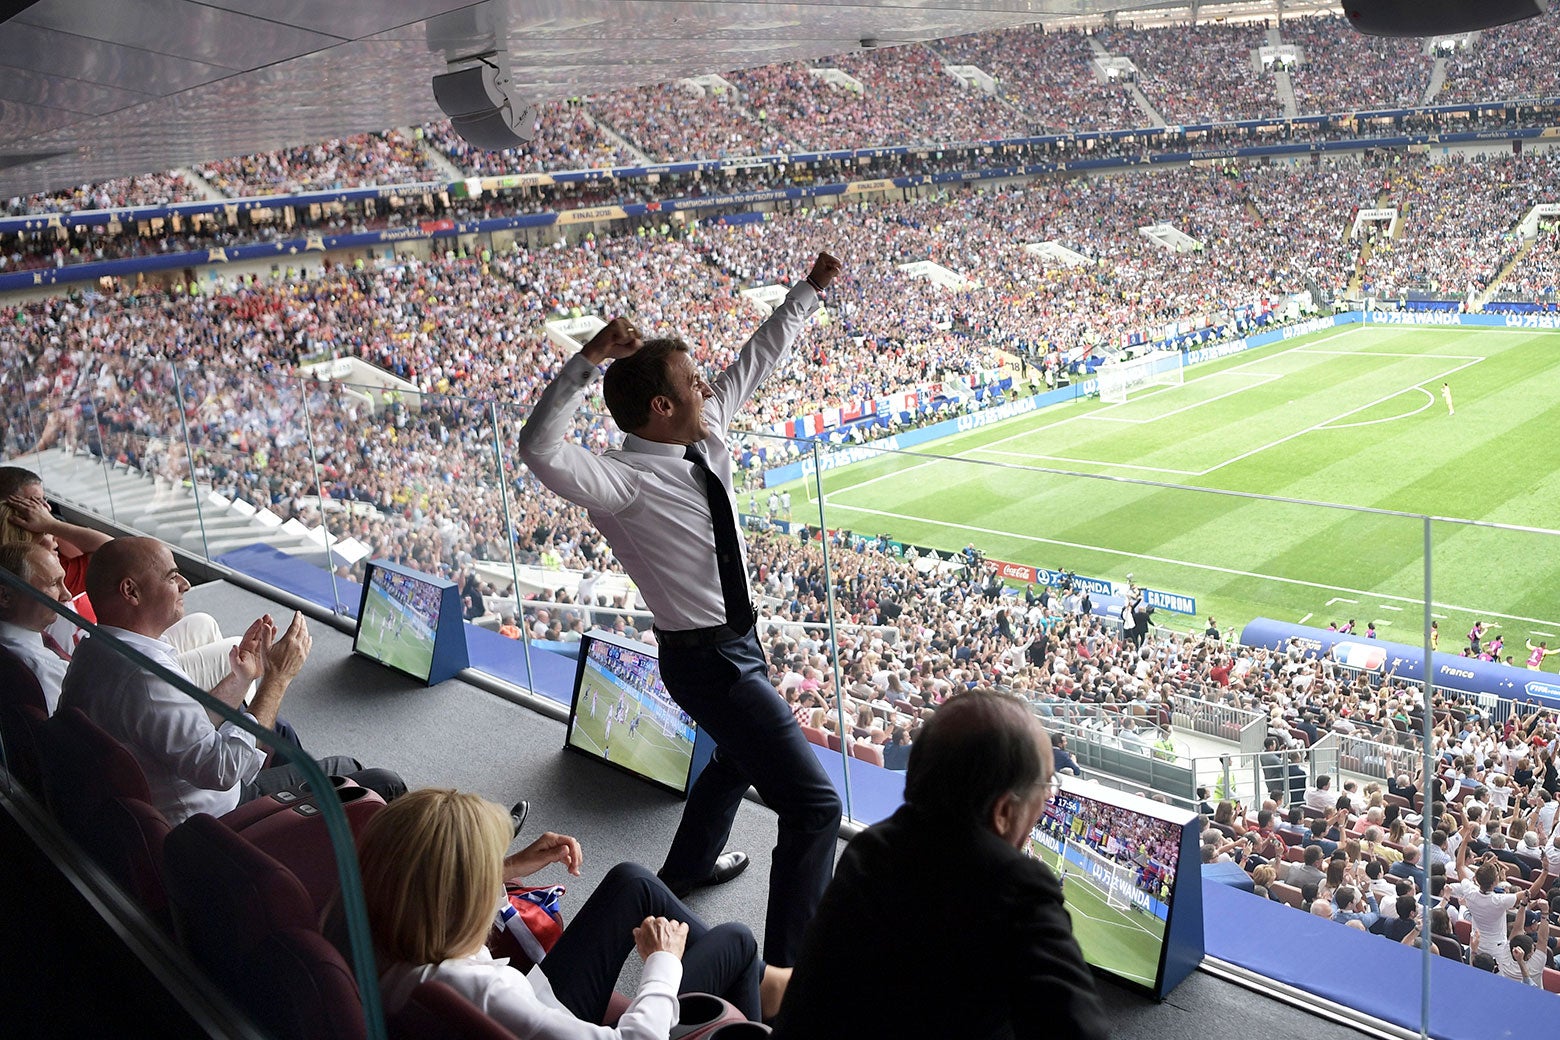 French President Emmanuel Macron reacts during the final match between France and Croatia at the 2018 soccer World Cup in the Luzhniki Stadium in Moscow, Russia on July 15, 2018. 